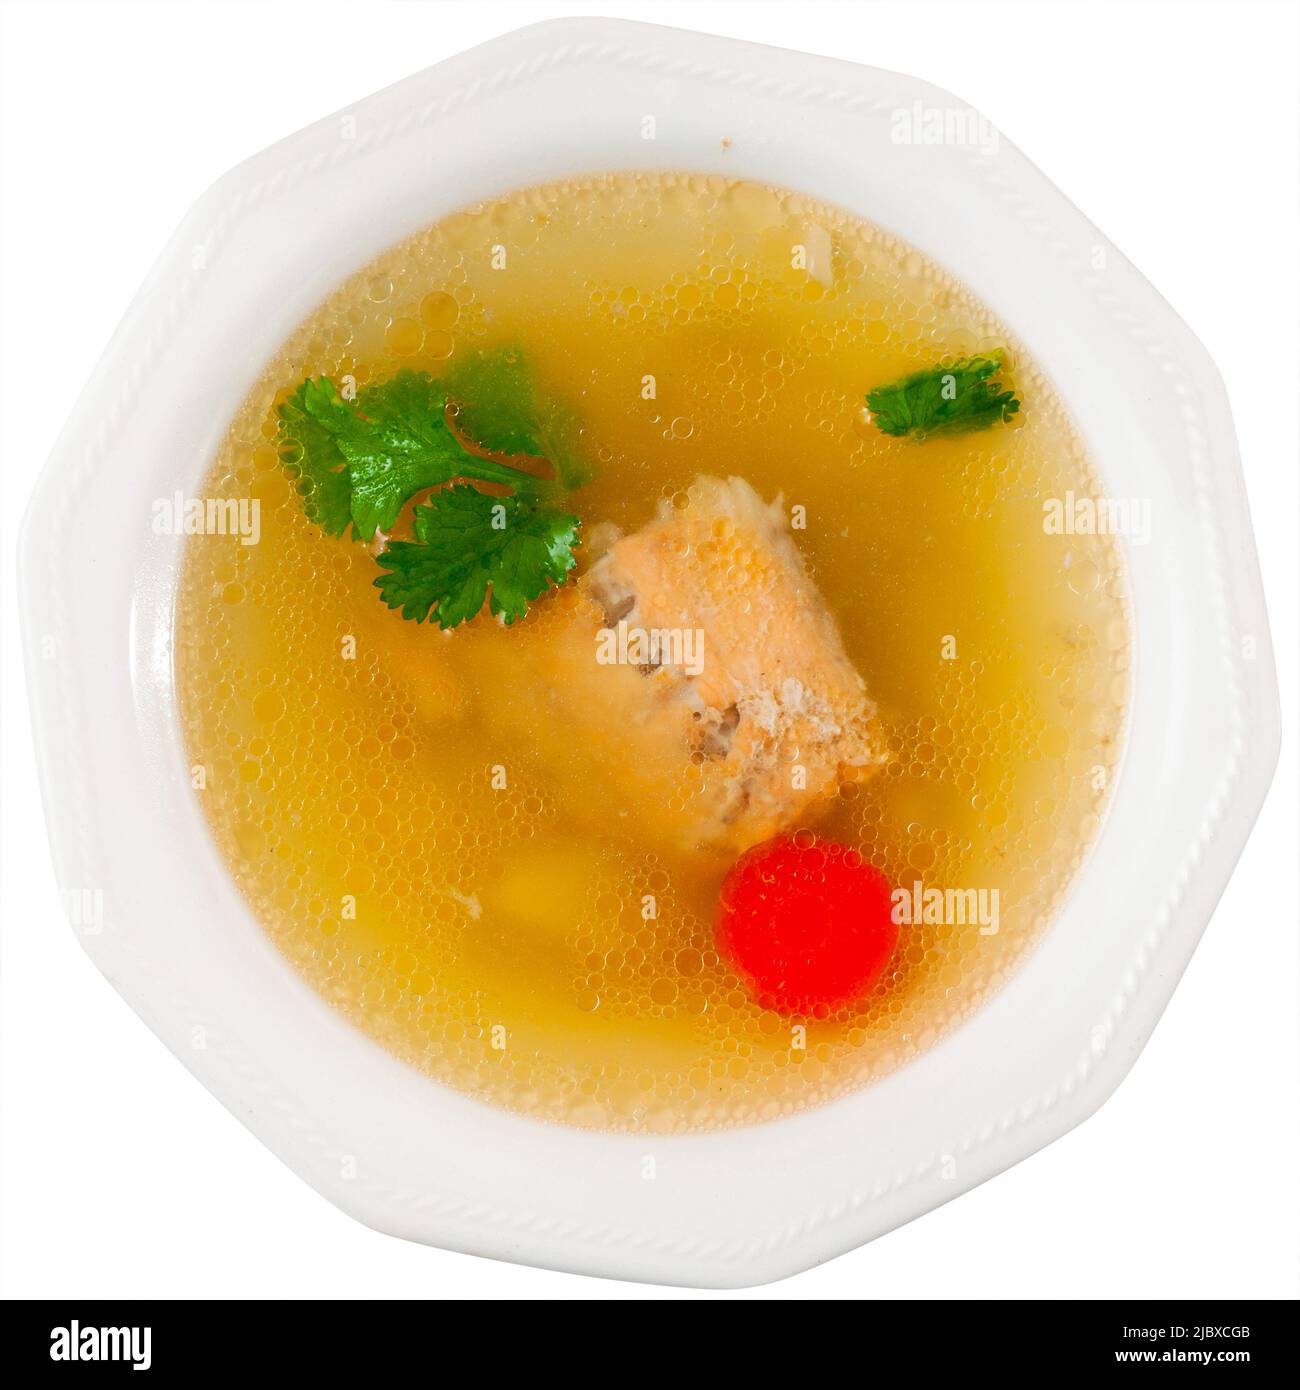 Portion of salmon offal soup Stock Photo